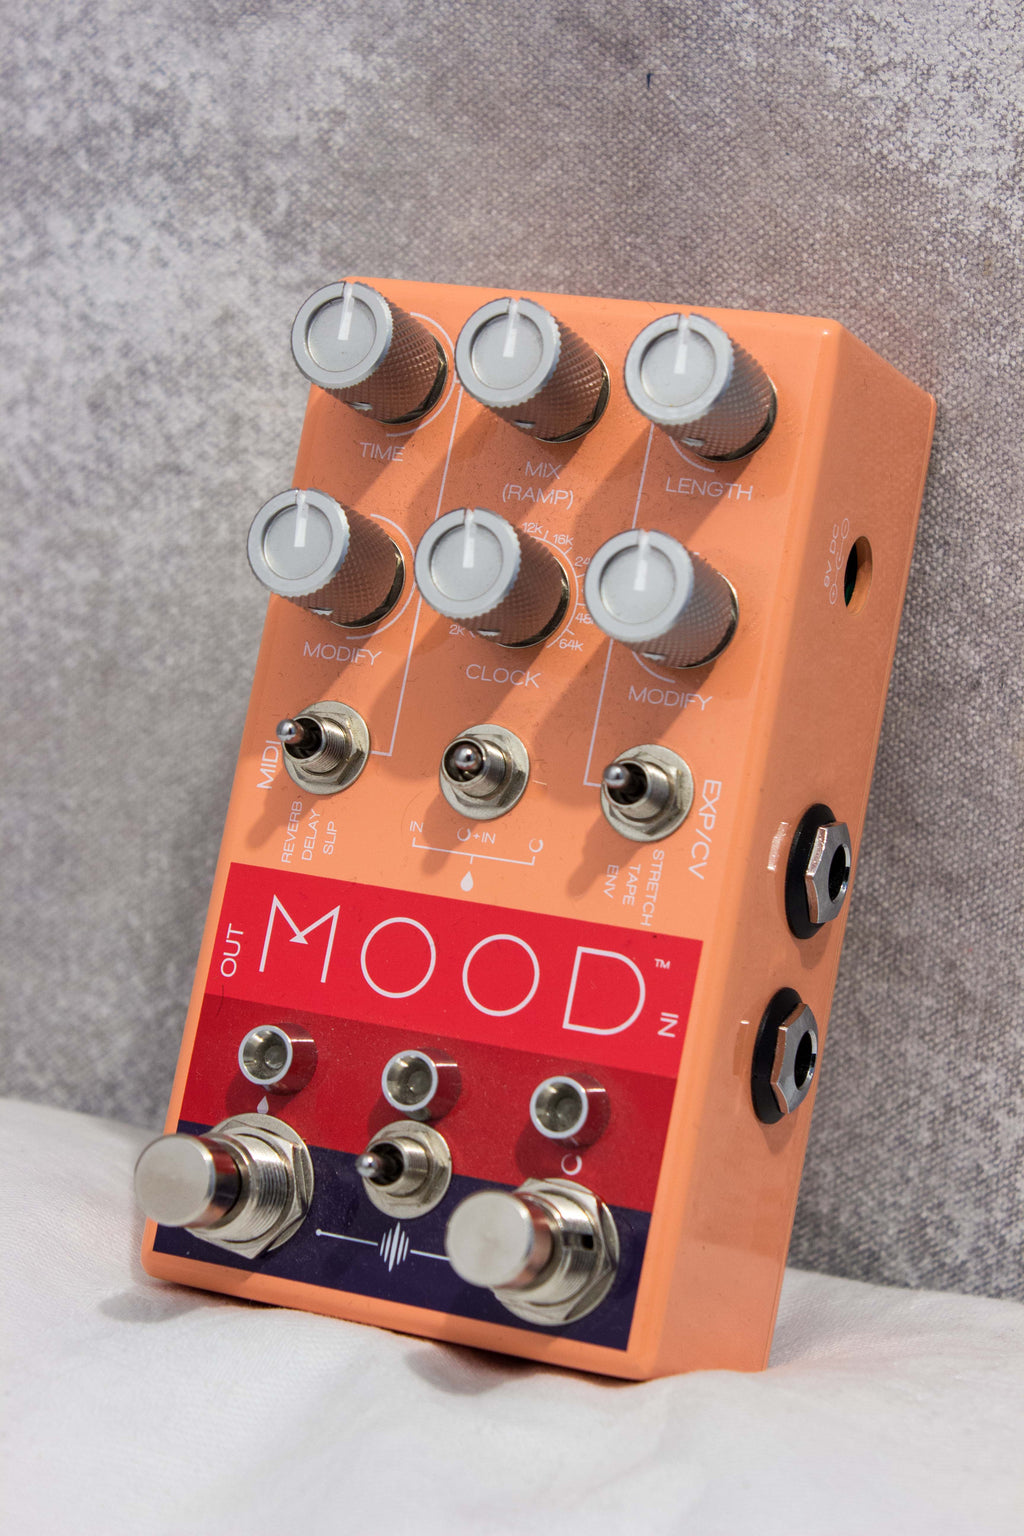 Chase Bliss Audio Mood Looper Pedal